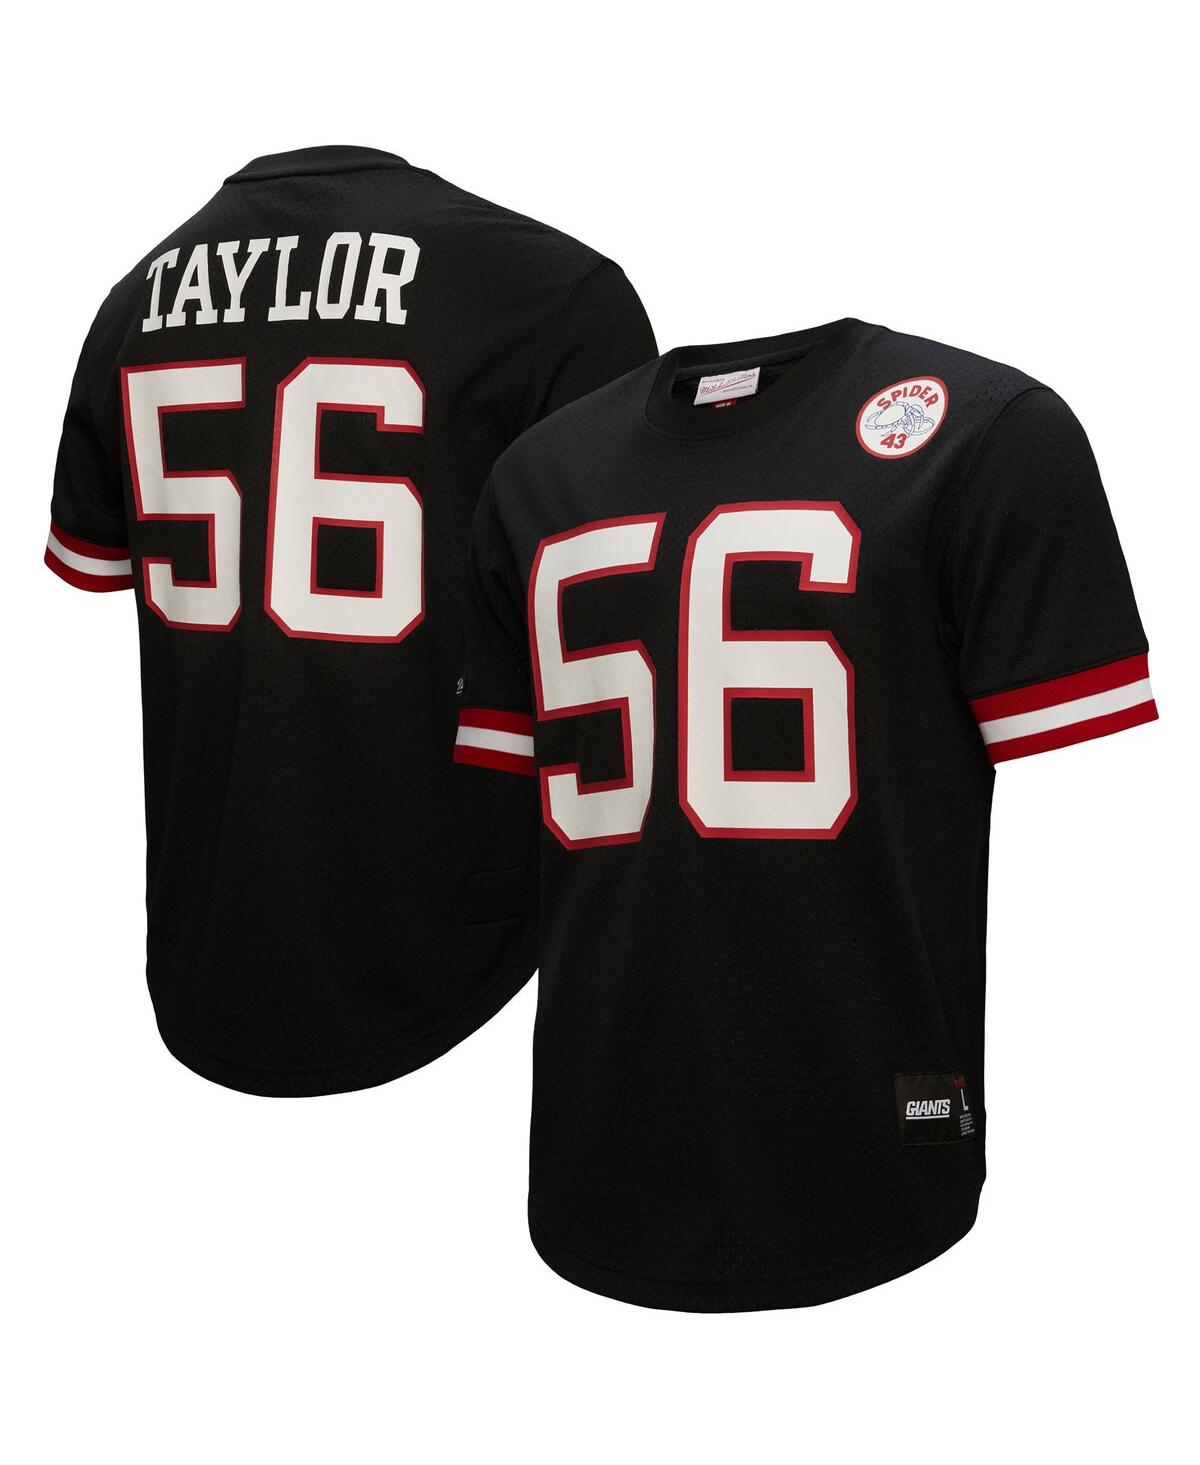 Men's Mitchell & Ness Lawrence Taylor Black New York Giants Big and Tall Mesh Player Name and Number Top - Black